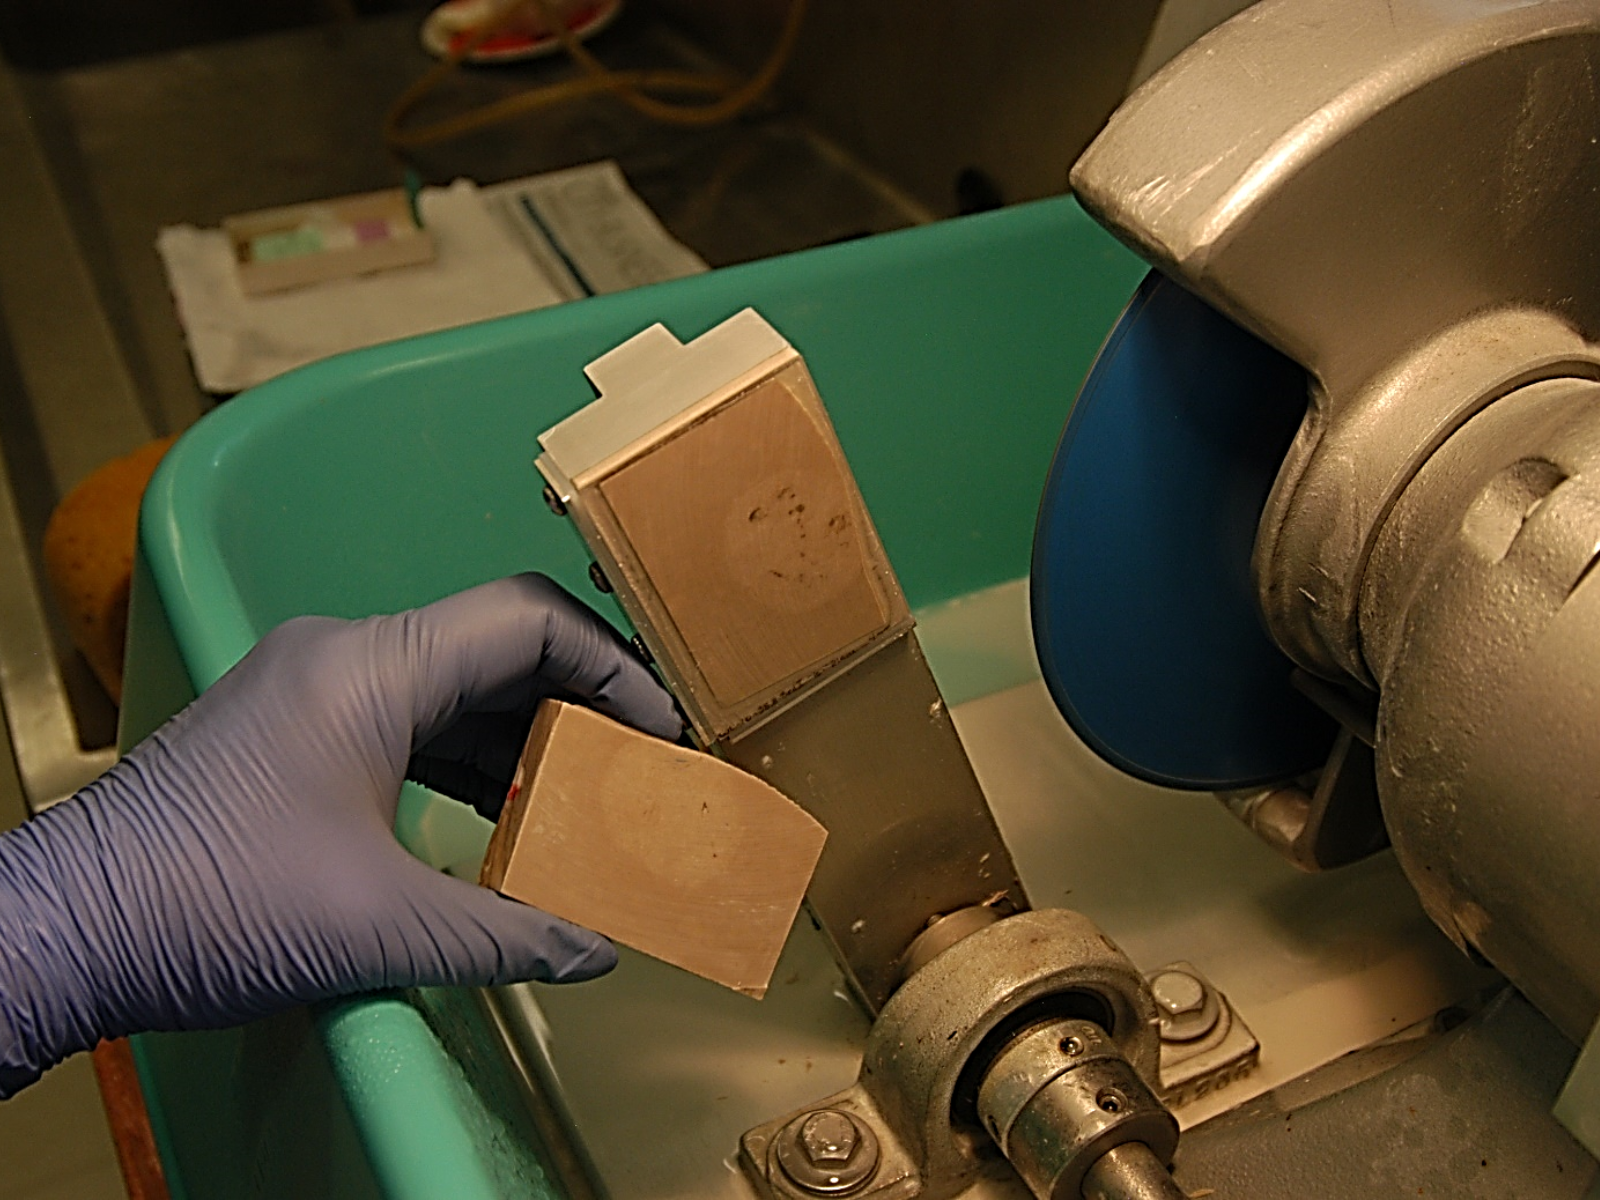 From out of frame a hand wearing a blue rubber glove holds a cut piece of a fossil specimen block. The remainder of the block is attached to the machine arm, near a saw blade. The saw is in a green, high-edged container, with murky water at the bottom.